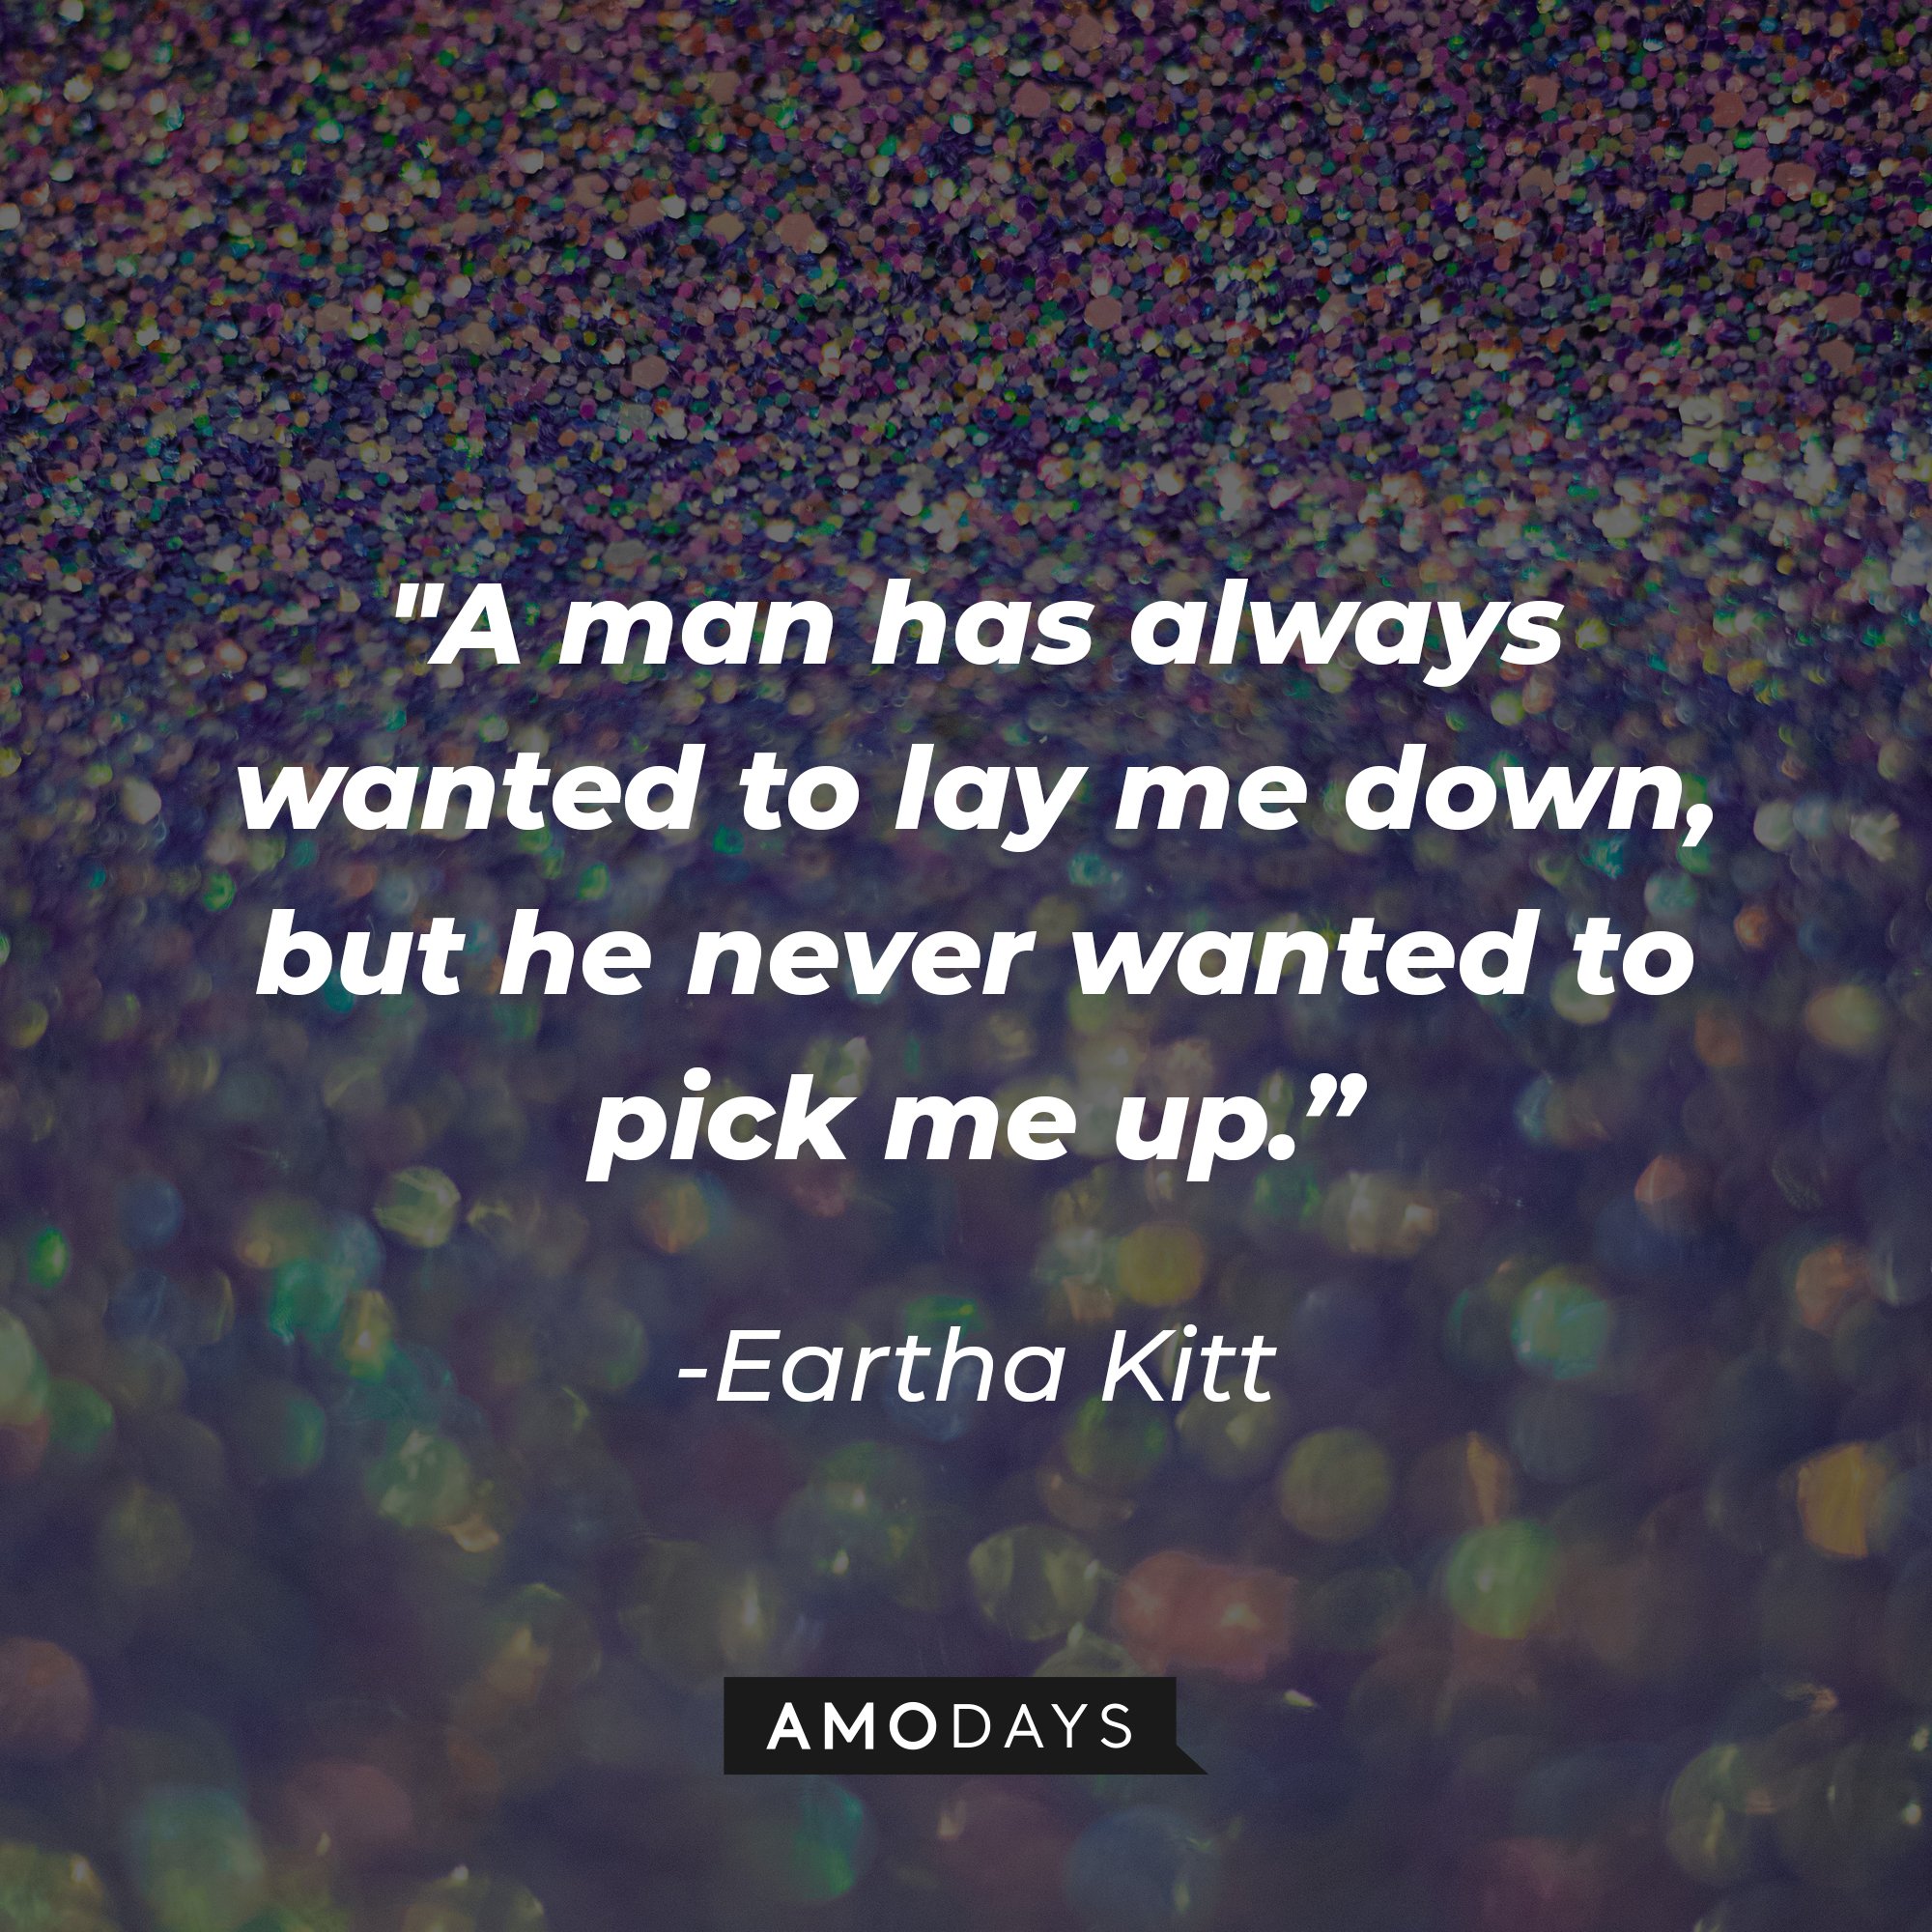 Eartha Kitt’s quote: "A man has always wanted to lay me down, but he never wanted to pick me up." | Image: AmoDays